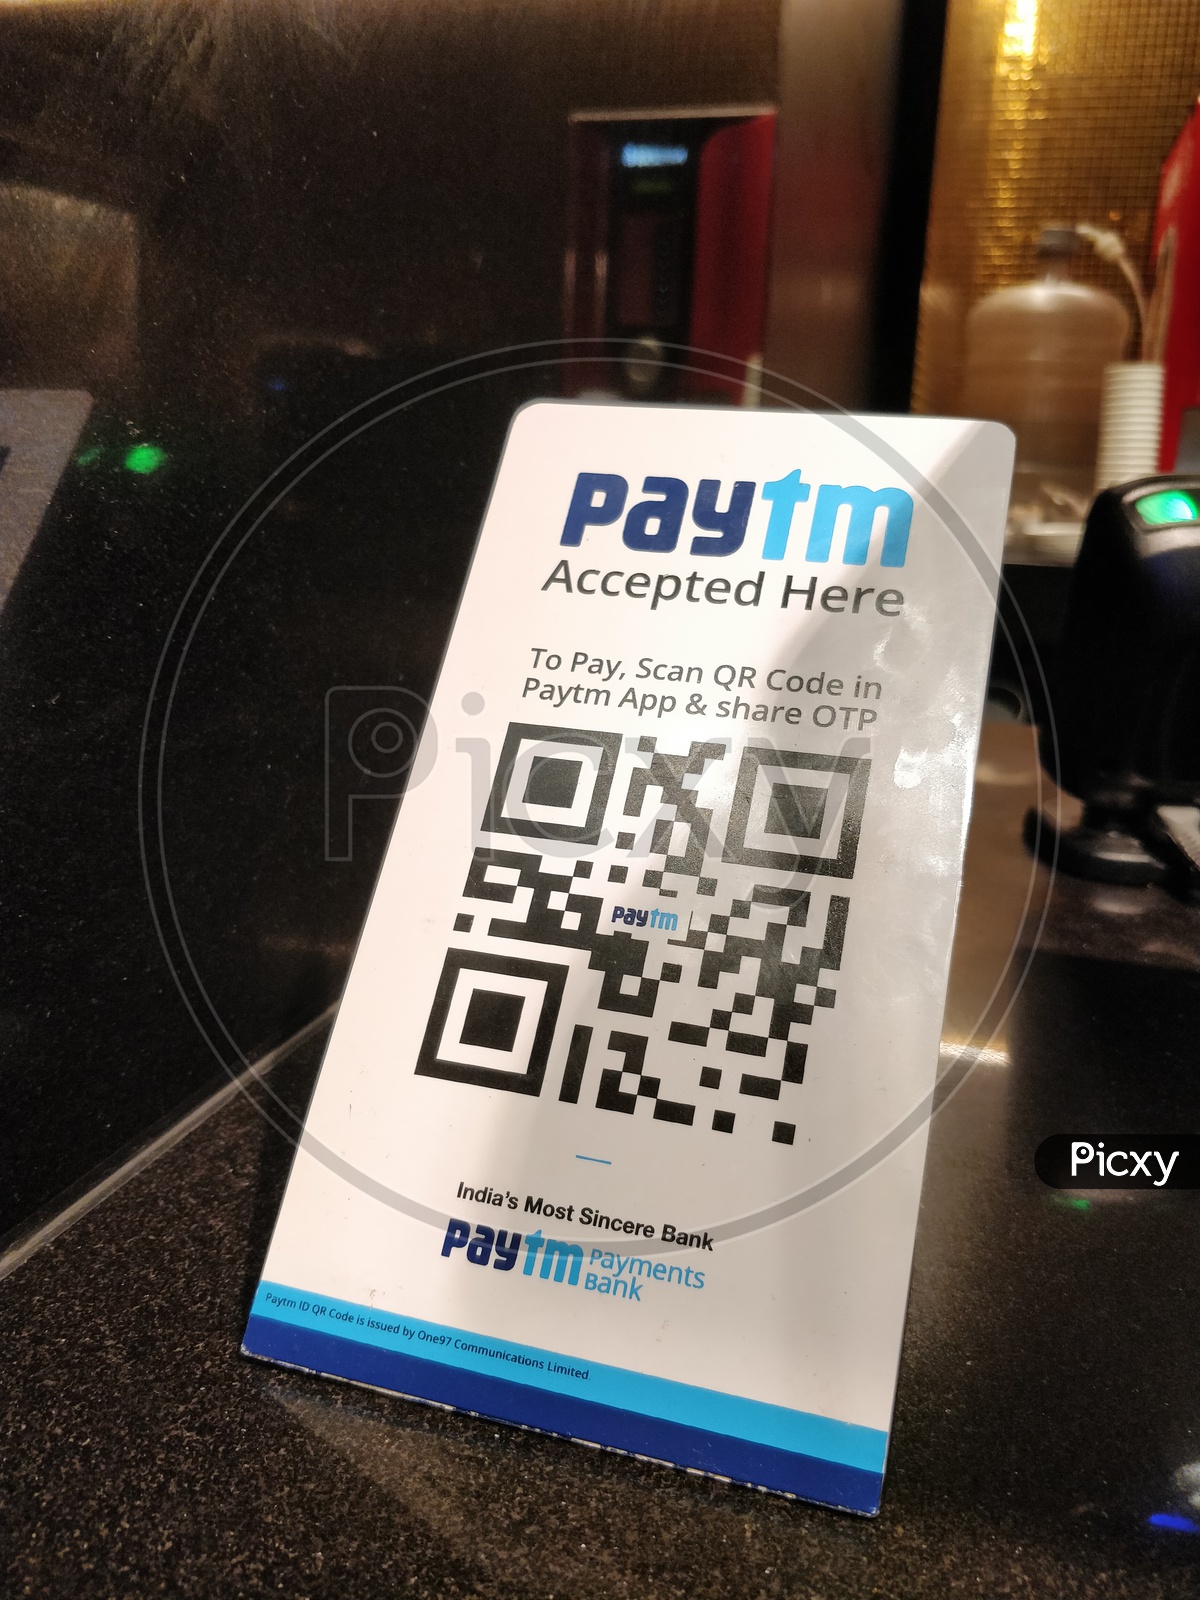 Image Of Paytm Accepted Here Hk883823 Picxy 6306